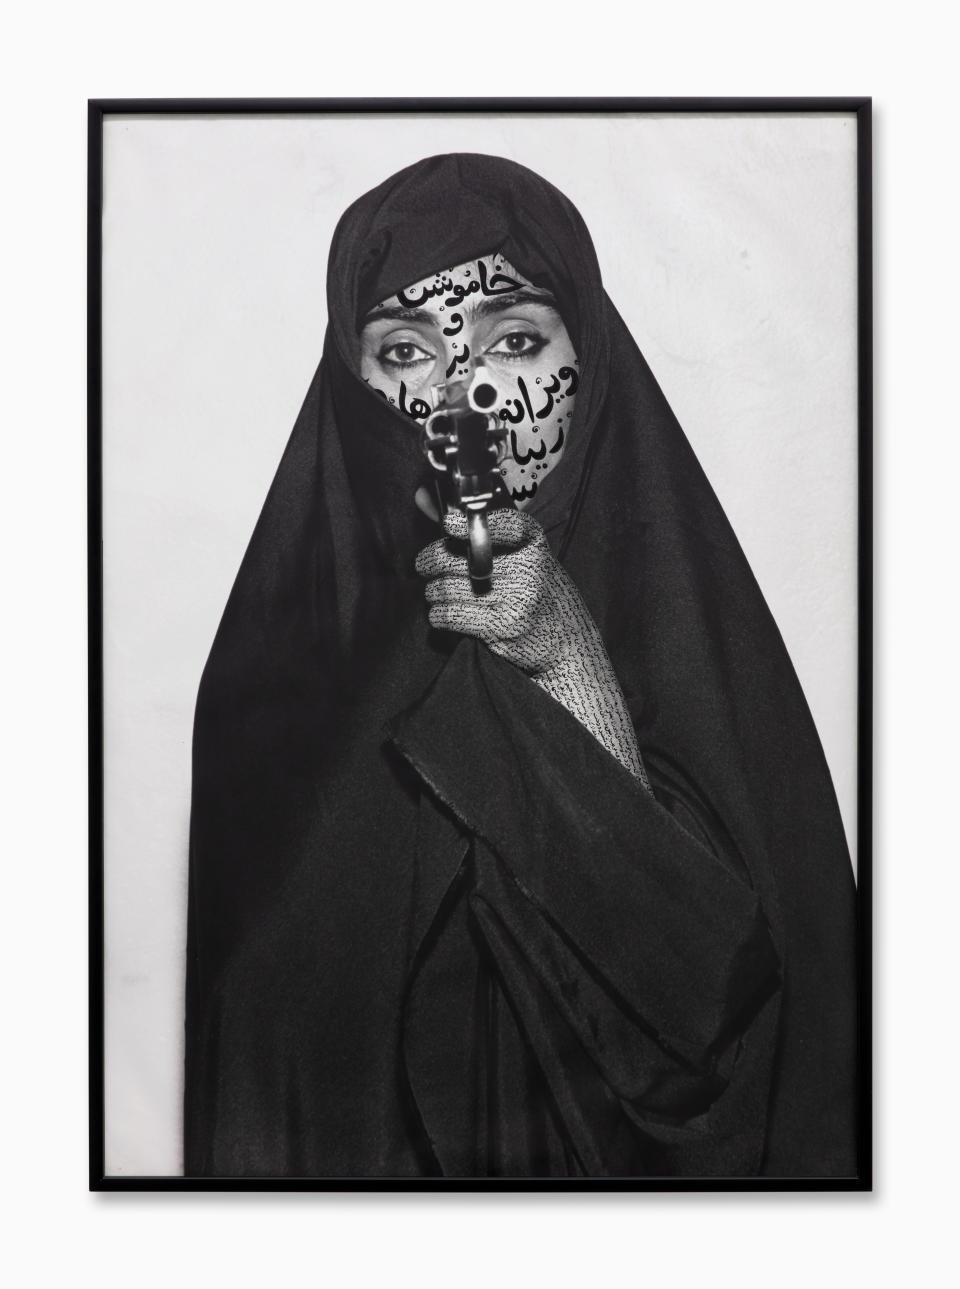 Shirin Neshat "Faceless from Women of Allah Series," 1994 photographic printing, ink; 149 x 107 cm